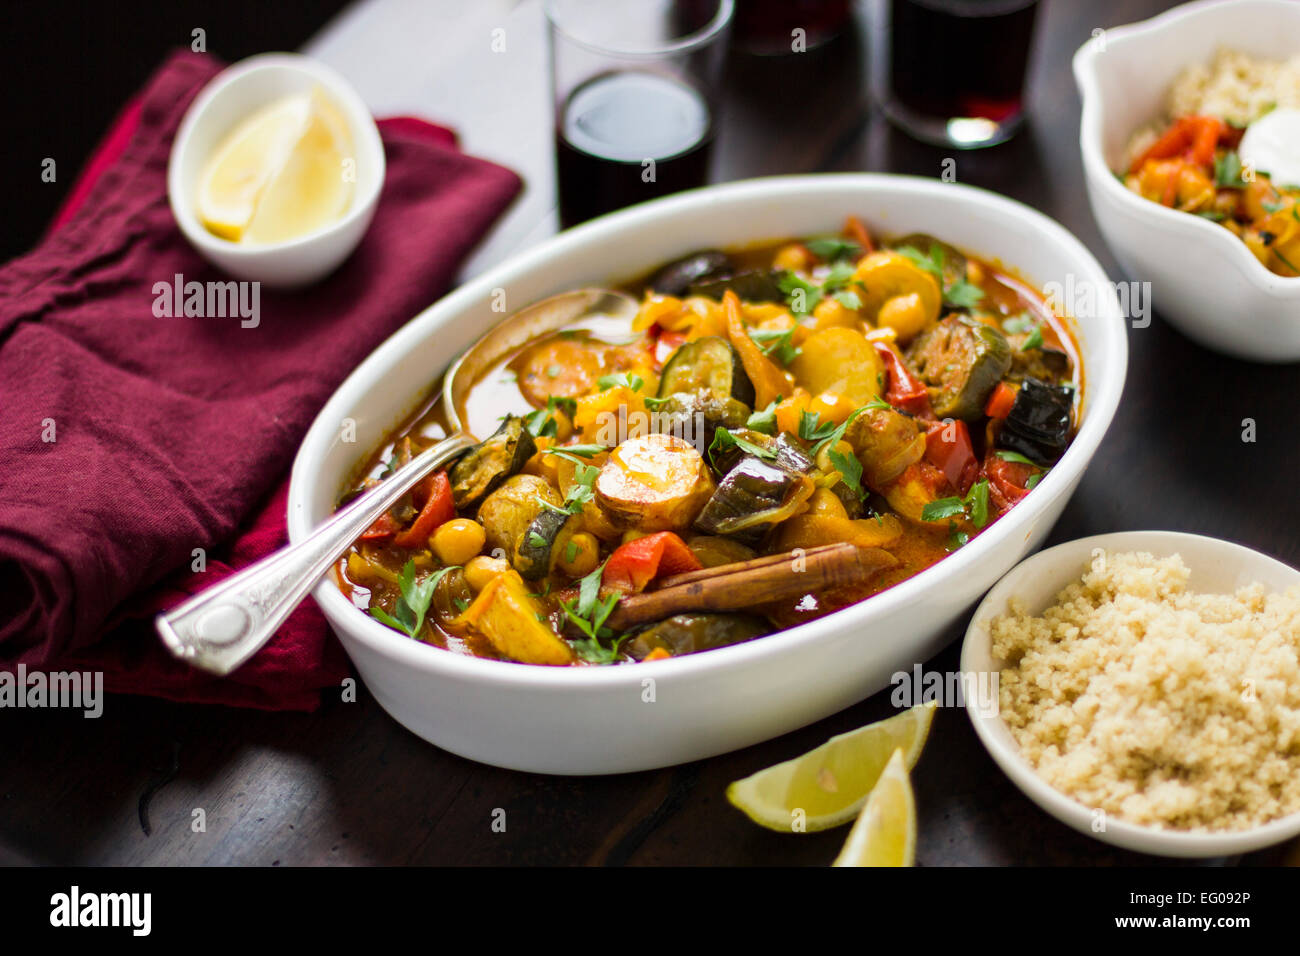 Summer vegetable tagine with cous cous Stock Photo